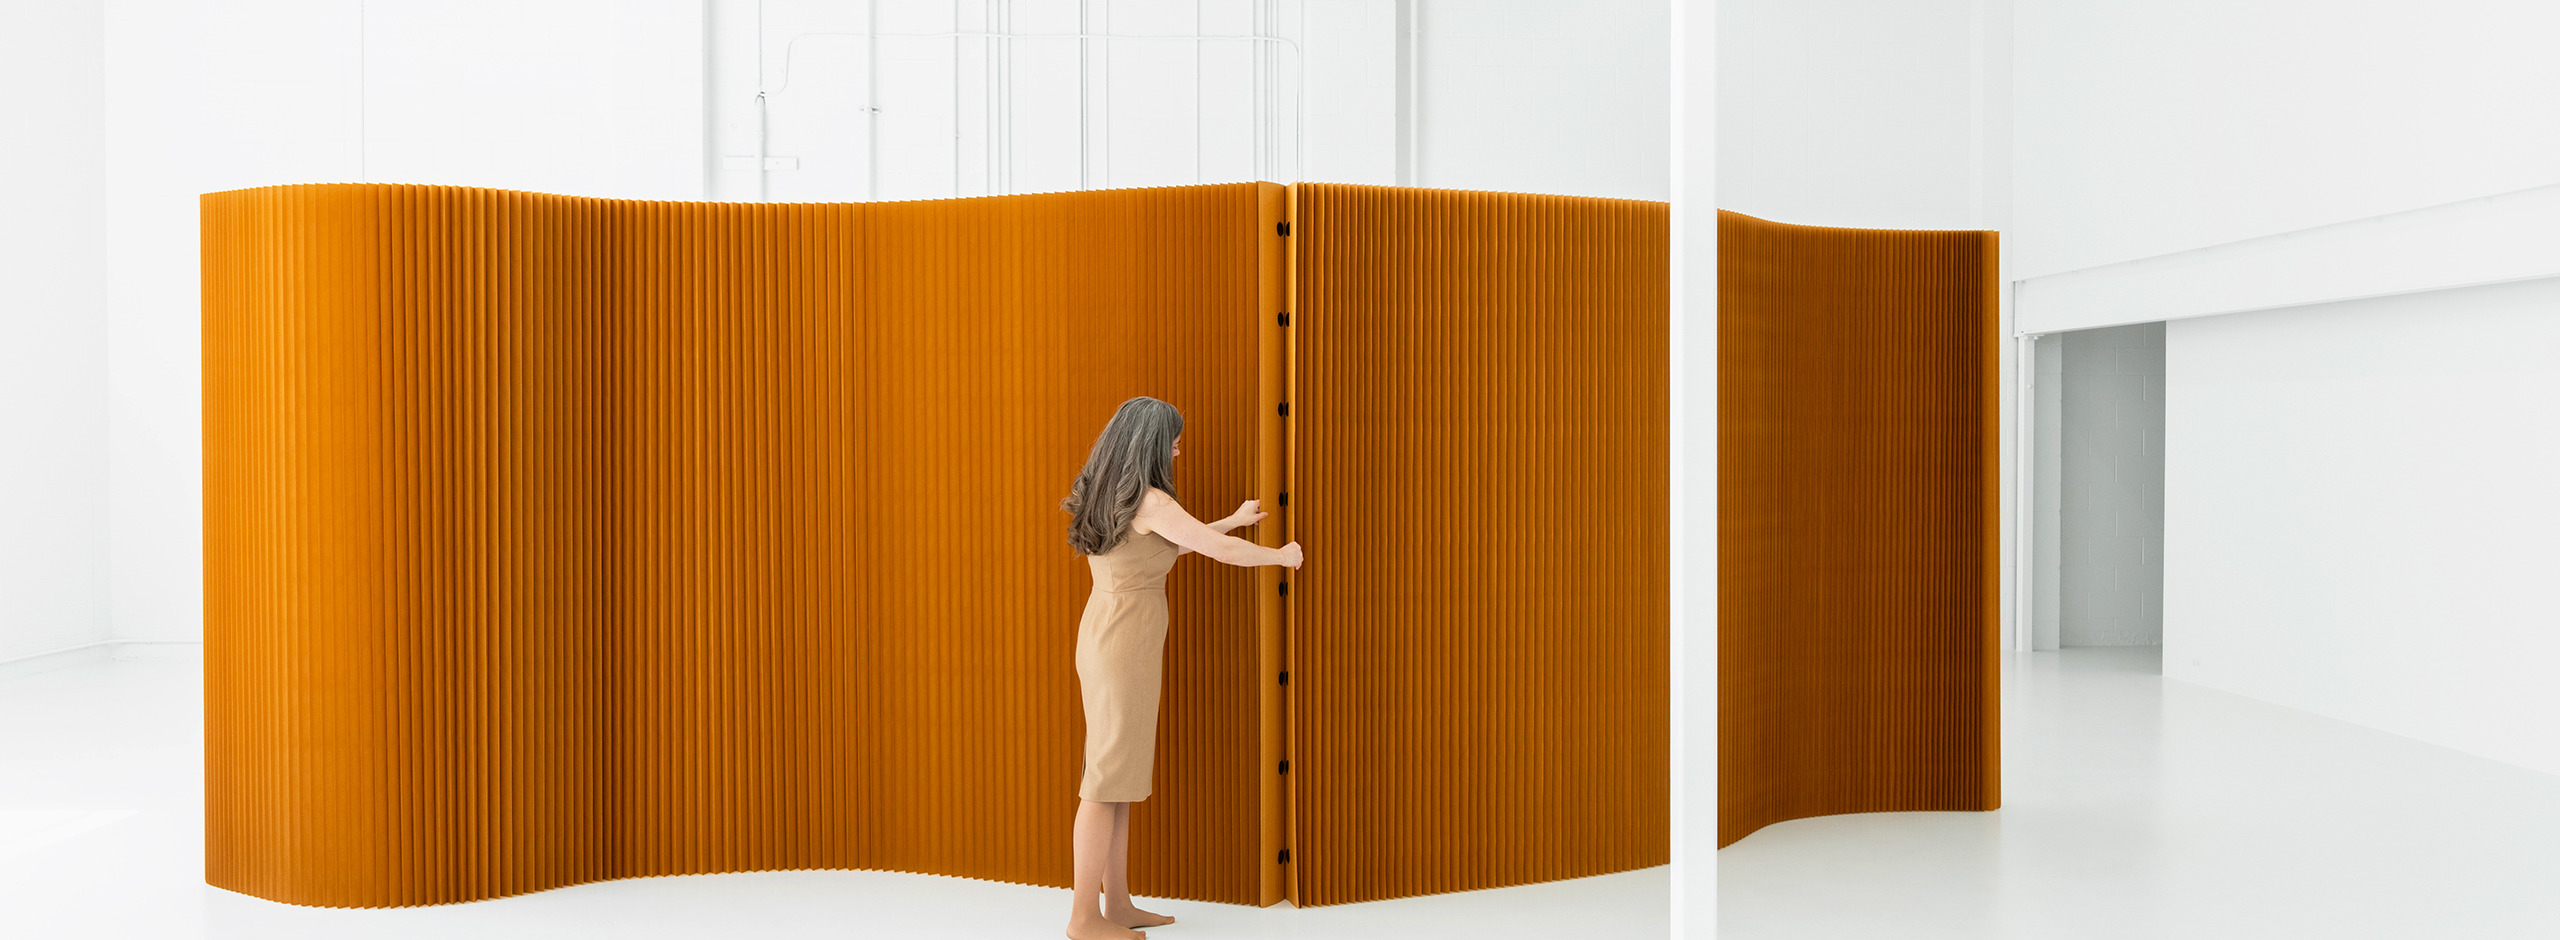 paper softwall | flexible freestanding partition